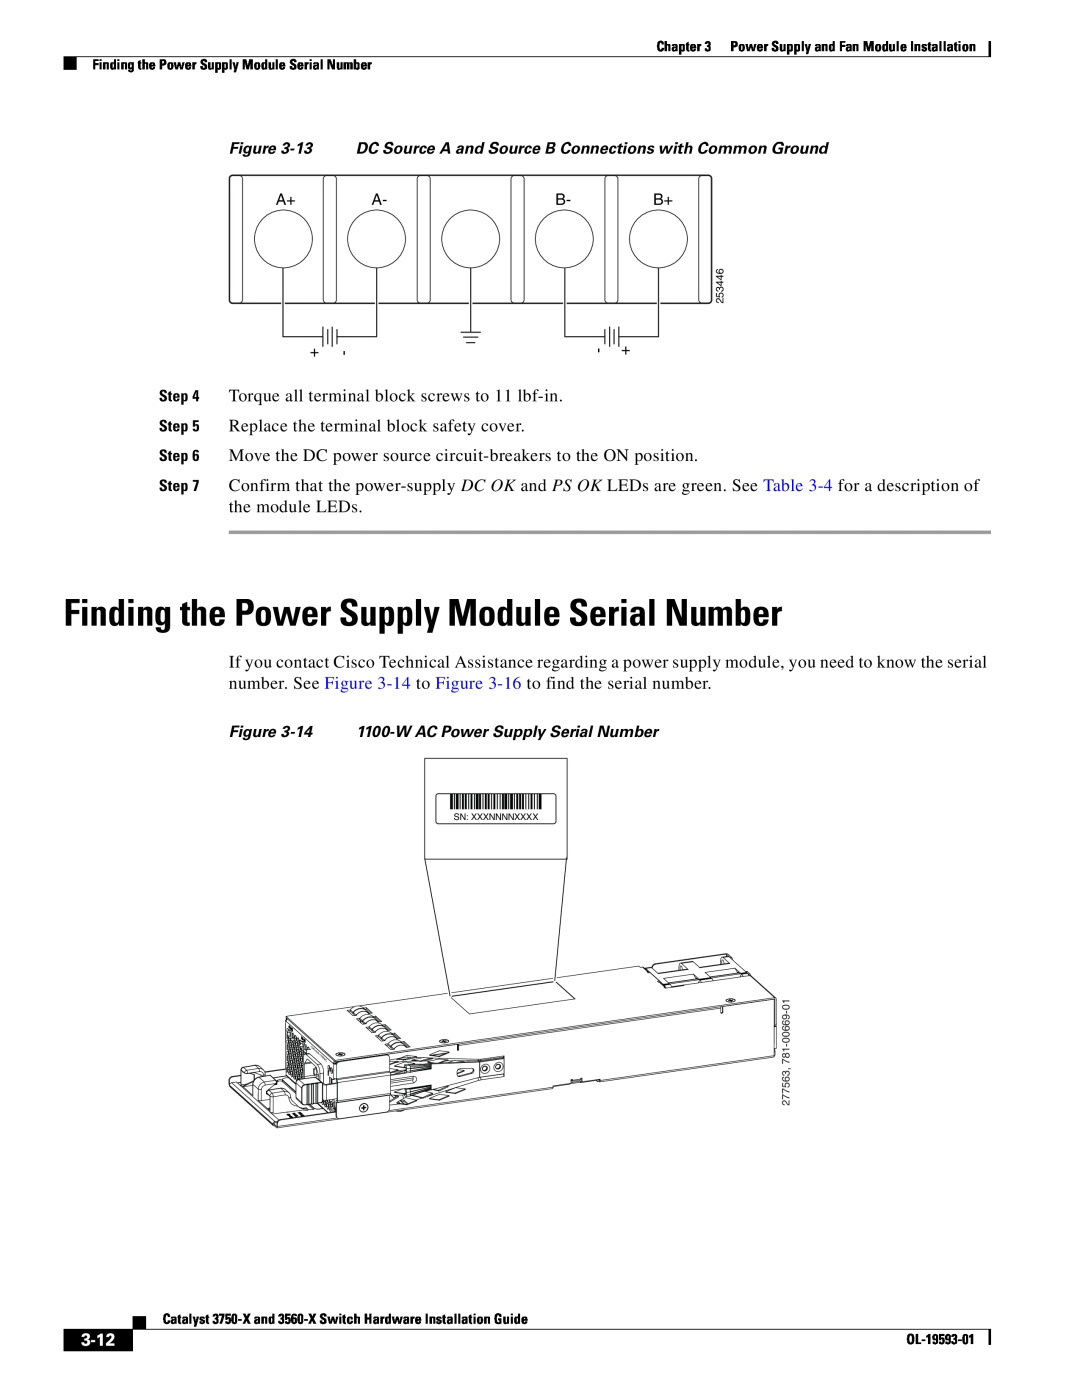 Cisco Systems 3750-X, 3560-X manual Finding the Power Supply Module Serial Number, 3-12 